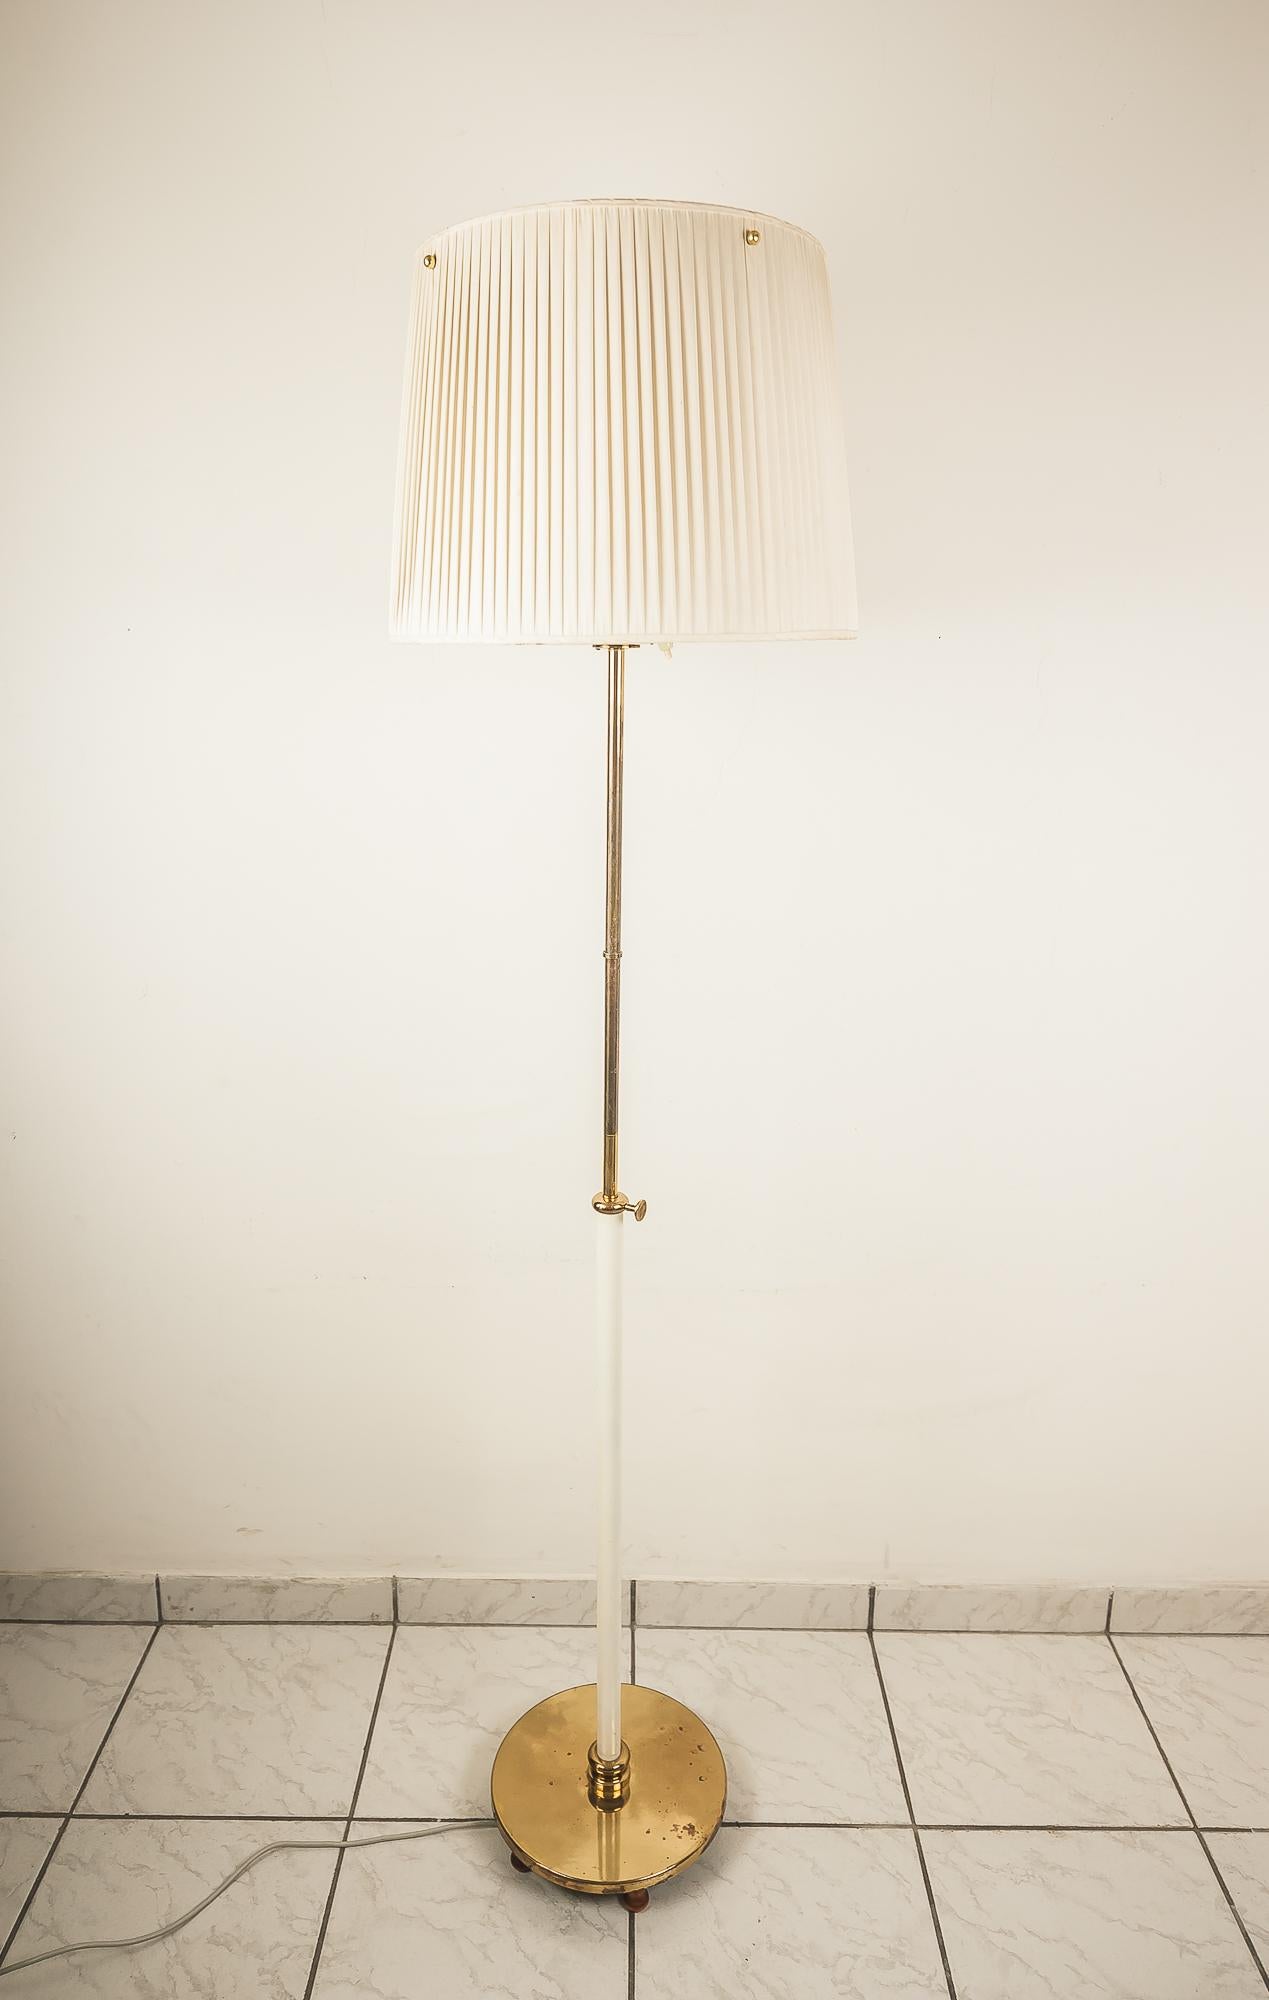 Adjustable floor lamp by Josef Frank for Svenskt Tenn, Sweden, 1950s
Original condition
The shade has a demage inside (outside not visible) See last two Images.
Measures: H 142cm extendable at 168 cm.